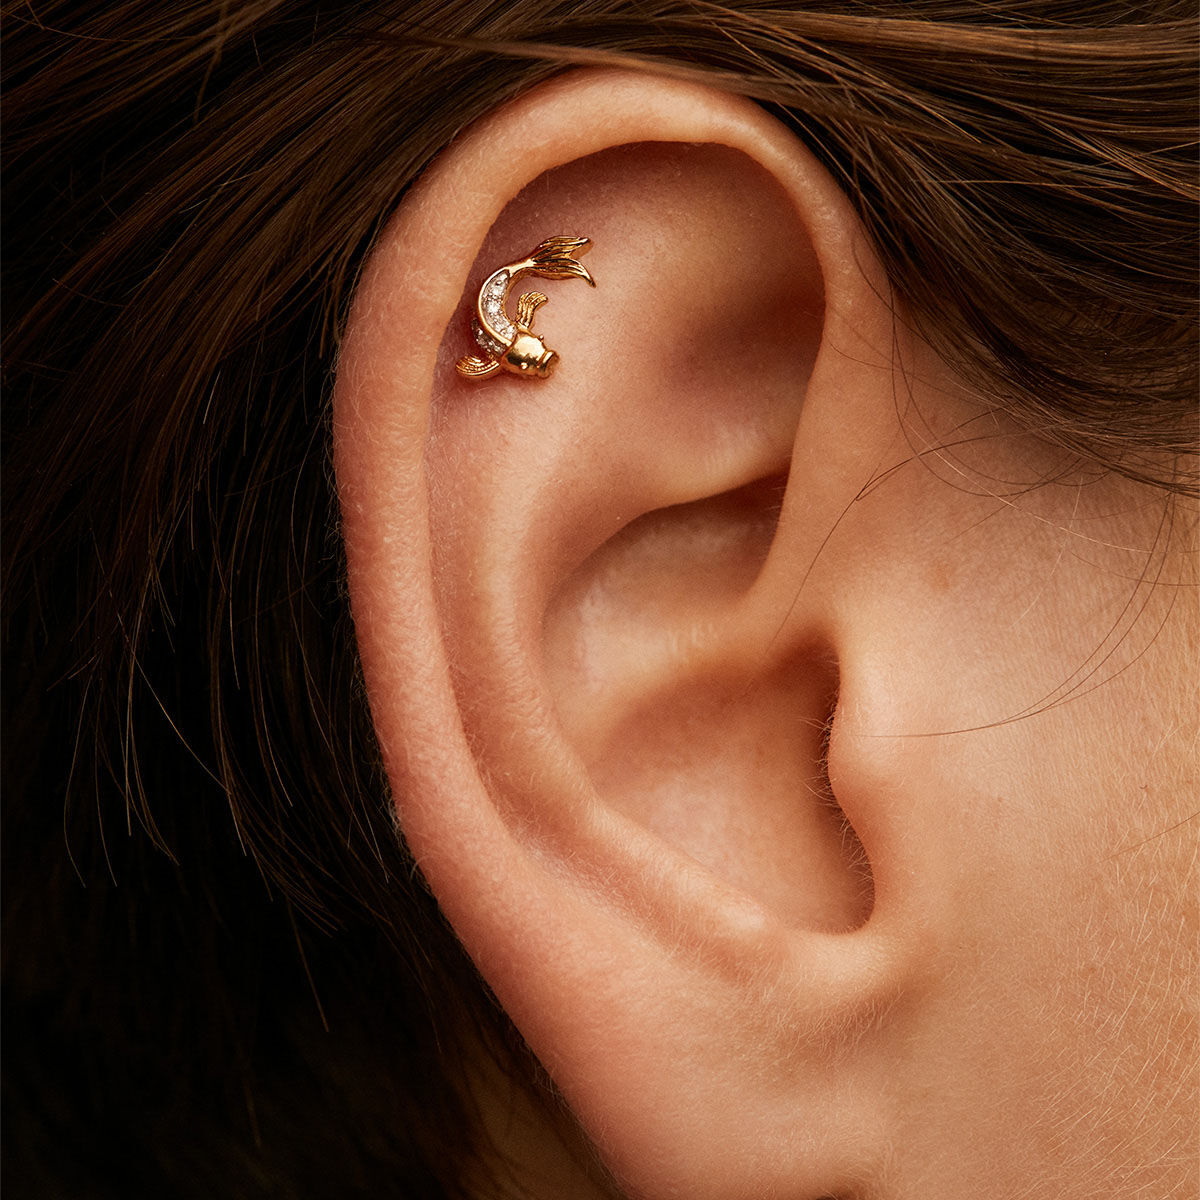 Single fish earring in 18k yellow gold with diamonds, J05096-02-H, hi-res